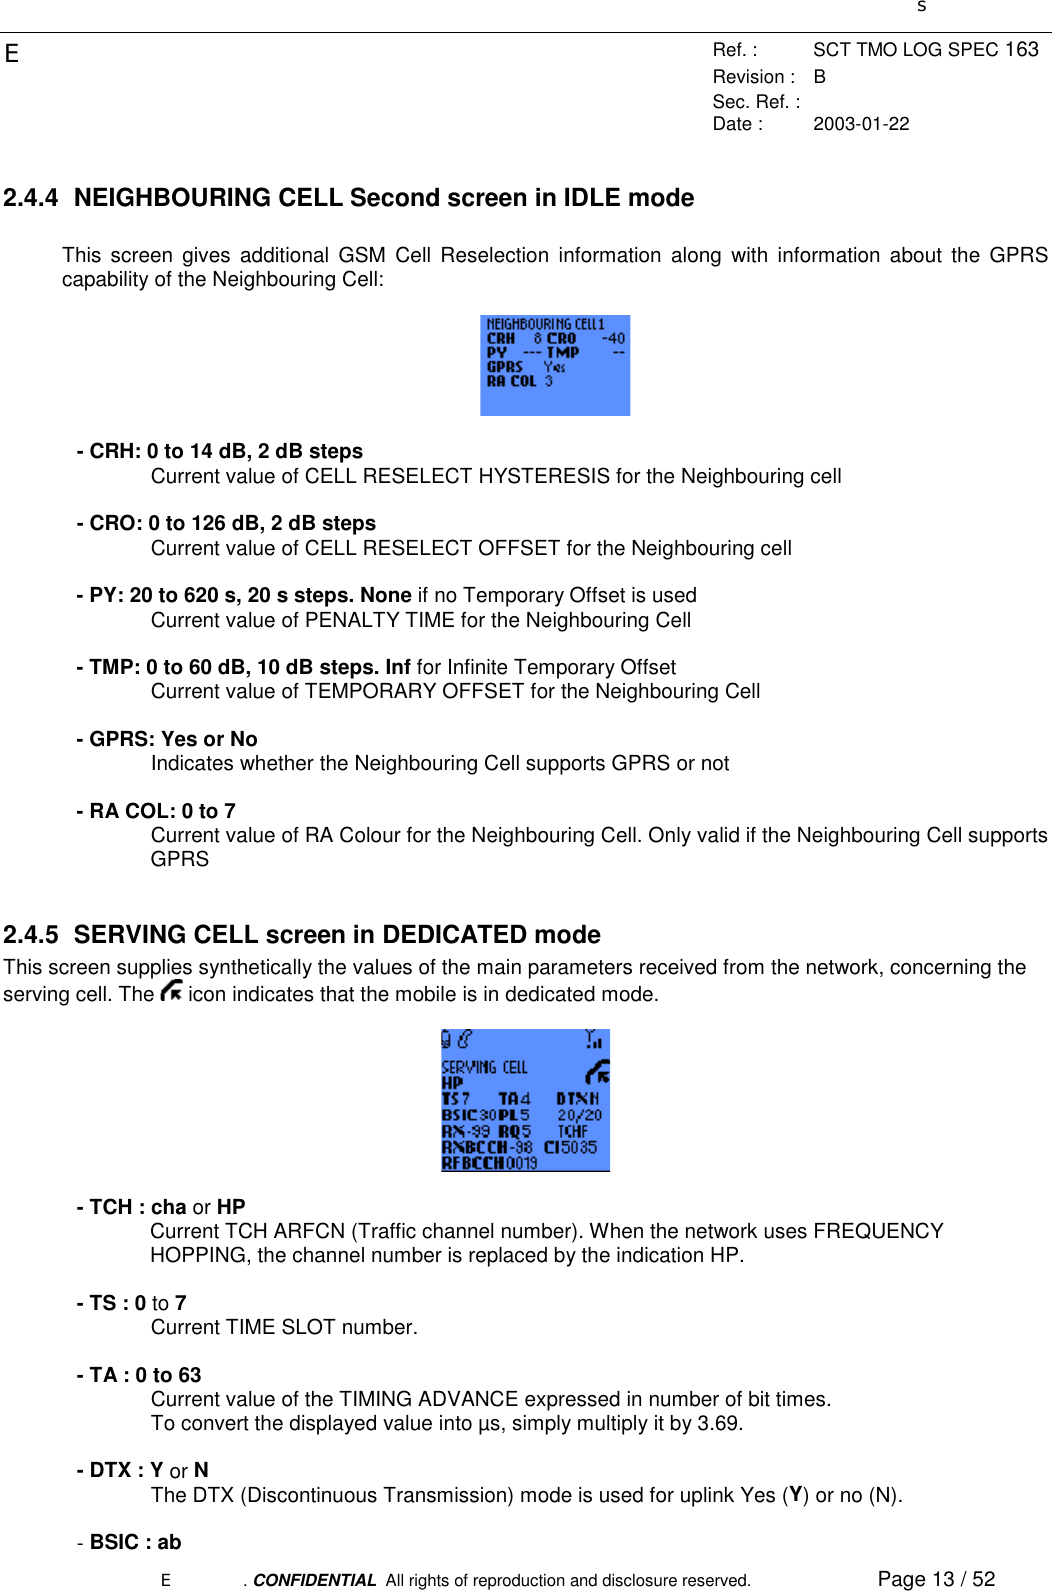 sERef. : SCT TMO LOG SPEC 163Revision : BSec. Ref. :Date : 2003-01-22E. CONFIDENTIAL  All rights of reproduction and disclosure reserved. Page 13 / 522.4.4  NEIGHBOURING CELL Second screen in IDLE modeThis screen gives additional GSM Cell Reselection information along with information about the GPRScapability of the Neighbouring Cell:- CRH: 0 to 14 dB, 2 dB stepsCurrent value of CELL RESELECT HYSTERESIS for the Neighbouring cell- CRO: 0 to 126 dB, 2 dB stepsCurrent value of CELL RESELECT OFFSET for the Neighbouring cell- PY: 20 to 620 s, 20 s steps. None if no Temporary Offset is usedCurrent value of PENALTY TIME for the Neighbouring Cell- TMP: 0 to 60 dB, 10 dB steps. Inf for Infinite Temporary OffsetCurrent value of TEMPORARY OFFSET for the Neighbouring Cell- GPRS: Yes or NoIndicates whether the Neighbouring Cell supports GPRS or not- RA COL: 0 to 7Current value of RA Colour for the Neighbouring Cell. Only valid if the Neighbouring Cell supportsGPRS2.4.5  SERVING CELL screen in DEDICATED modeThis screen supplies synthetically the values of the main parameters received from the network, concerning theserving cell. The   icon indicates that the mobile is in dedicated mode.- TCH : cha or HPCurrent TCH ARFCN (Traffic channel number). When the network uses FREQUENCYHOPPING, the channel number is replaced by the indication HP.- TS : 0 to 7Current TIME SLOT number.- TA : 0 to 63Current value of the TIMING ADVANCE expressed in number of bit times.To convert the displayed value into µs, simply multiply it by 3.69.- DTX : Y or NThe DTX (Discontinuous Transmission) mode is used for uplink Yes (Y) or no (N).- BSIC : ab